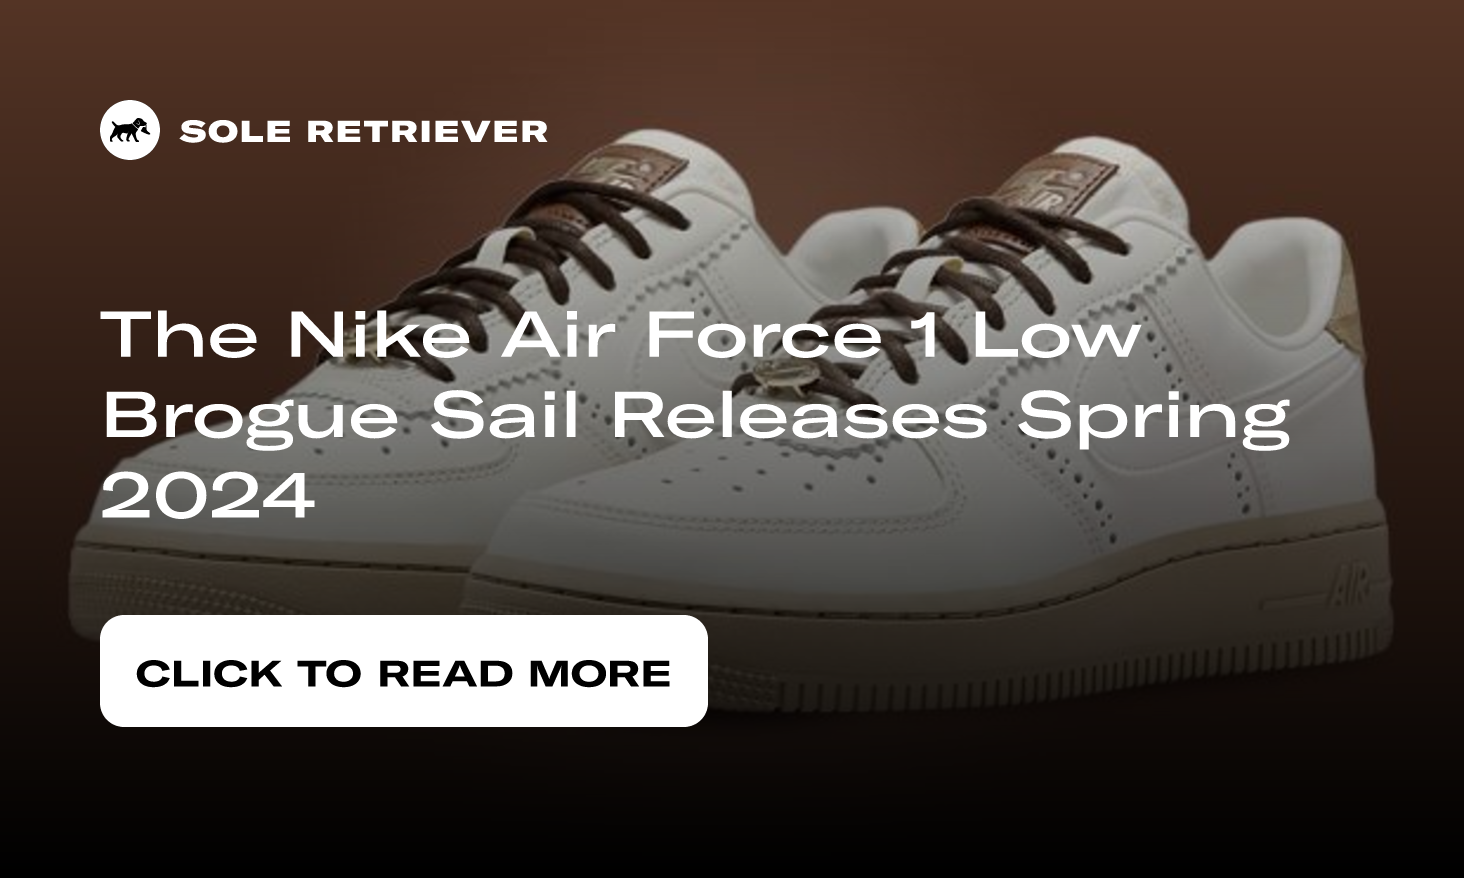 The Nike Air Force 1 Low Brogue Sail Releases Spring 2024